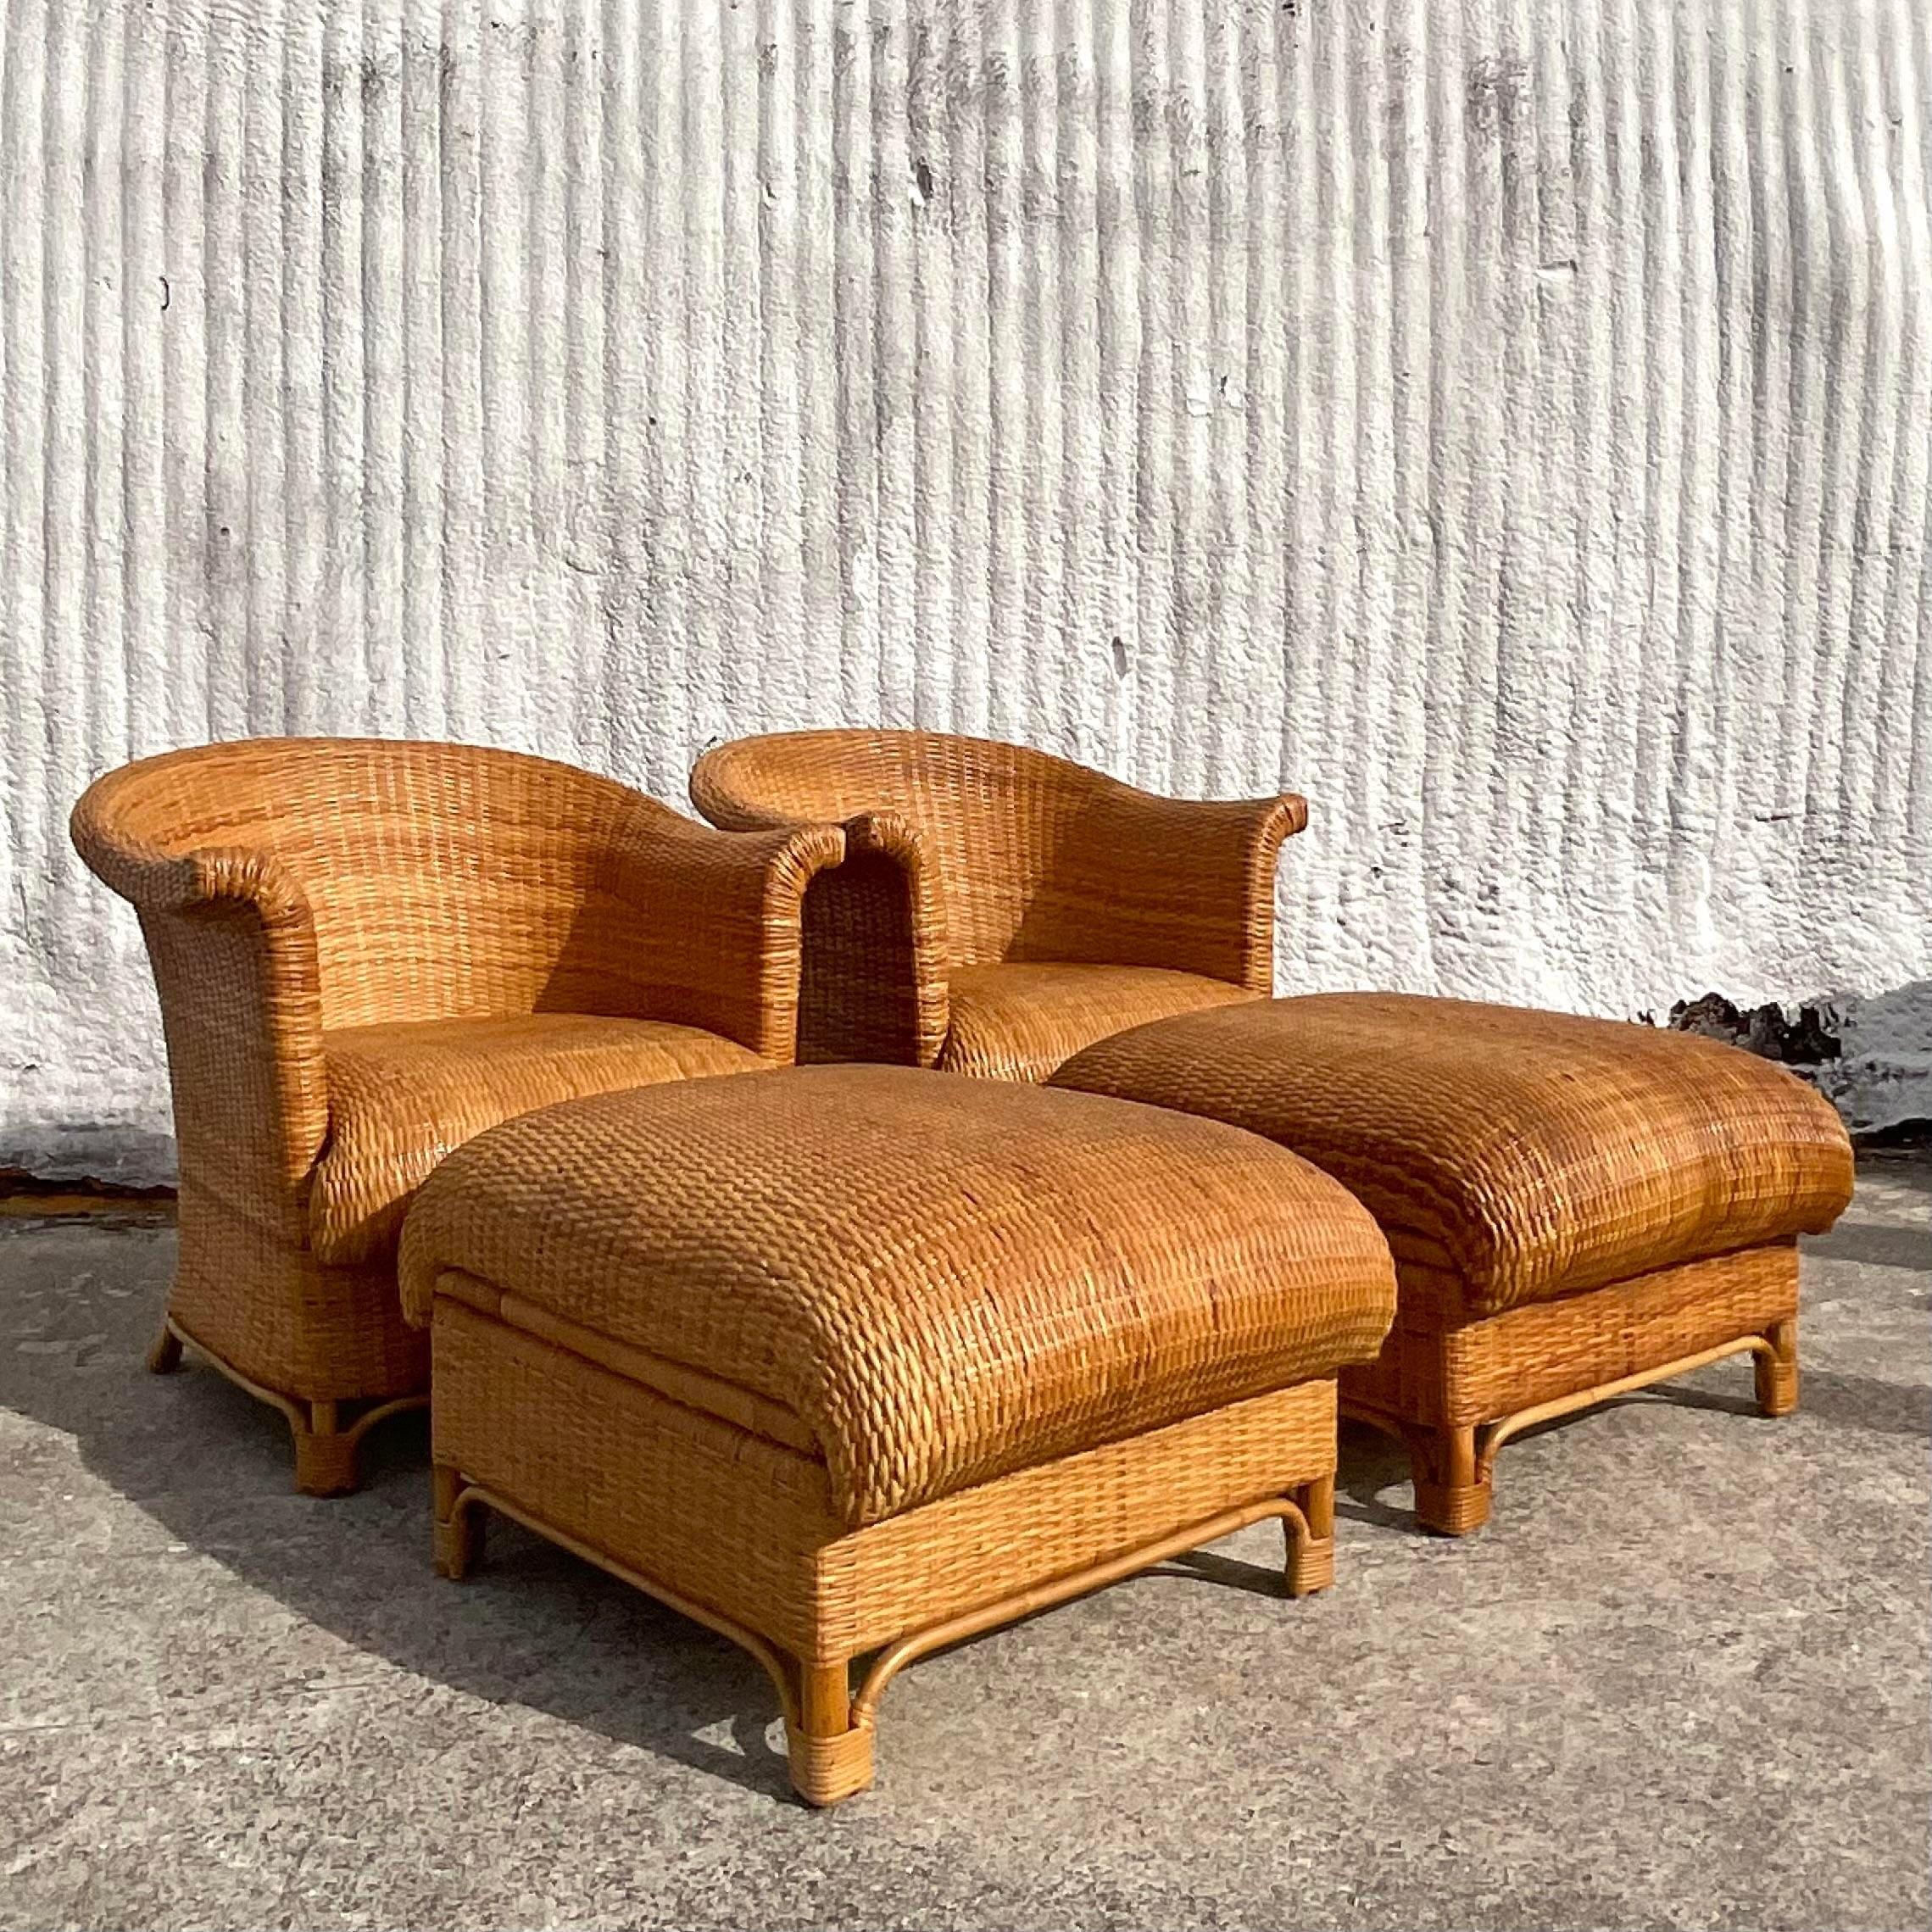 Vintage Coastal Italian Woven Rattan Club Chairs - Set of 2 In Good Condition For Sale In west palm beach, FL